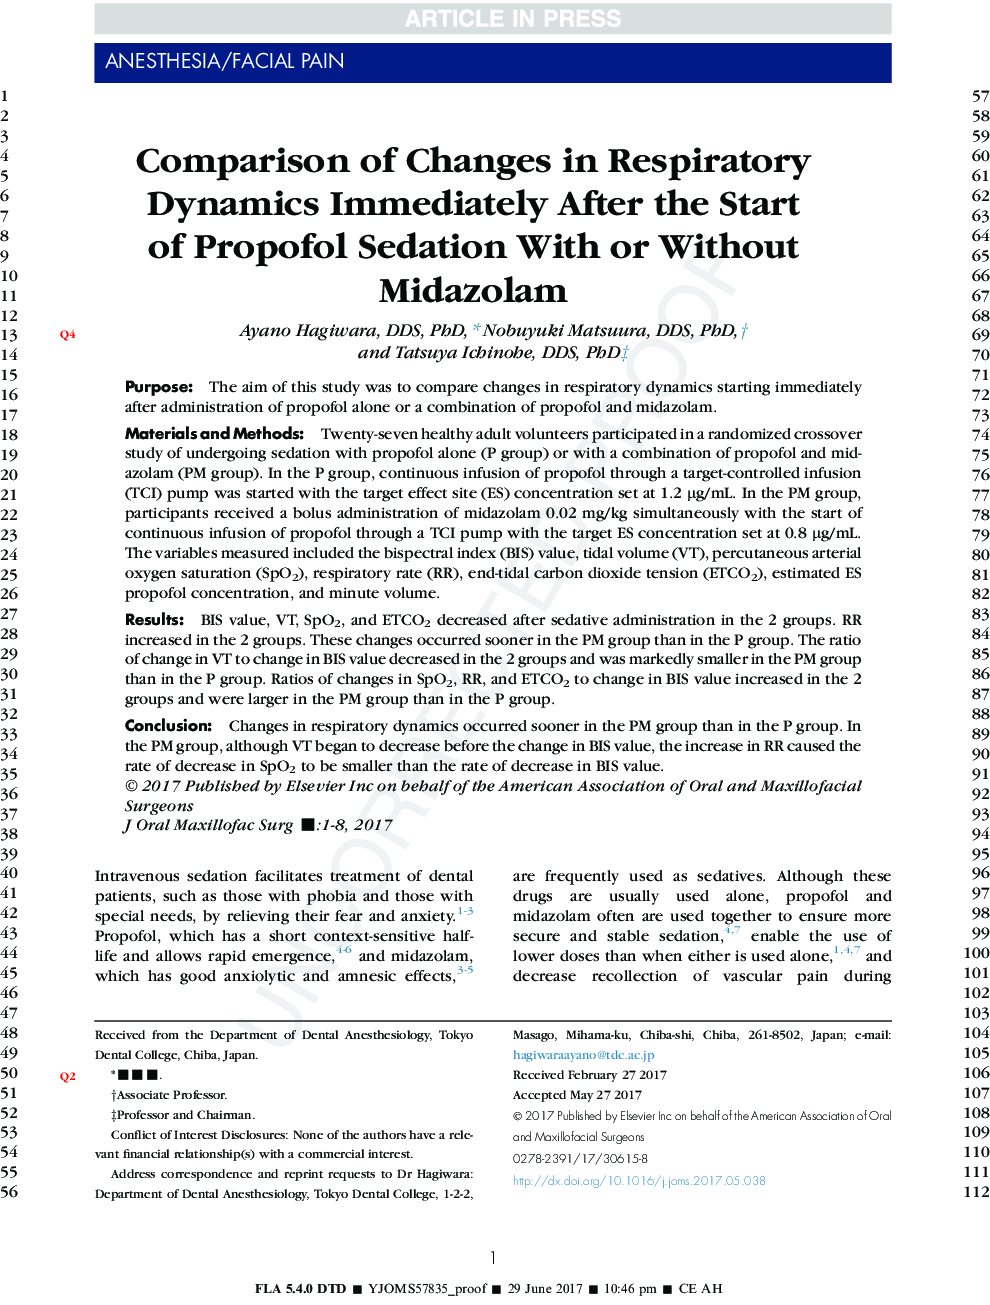 Comparison of Changes in Respiratory Dynamics Immediately After the Start of Propofol Sedation With or Without Midazolam